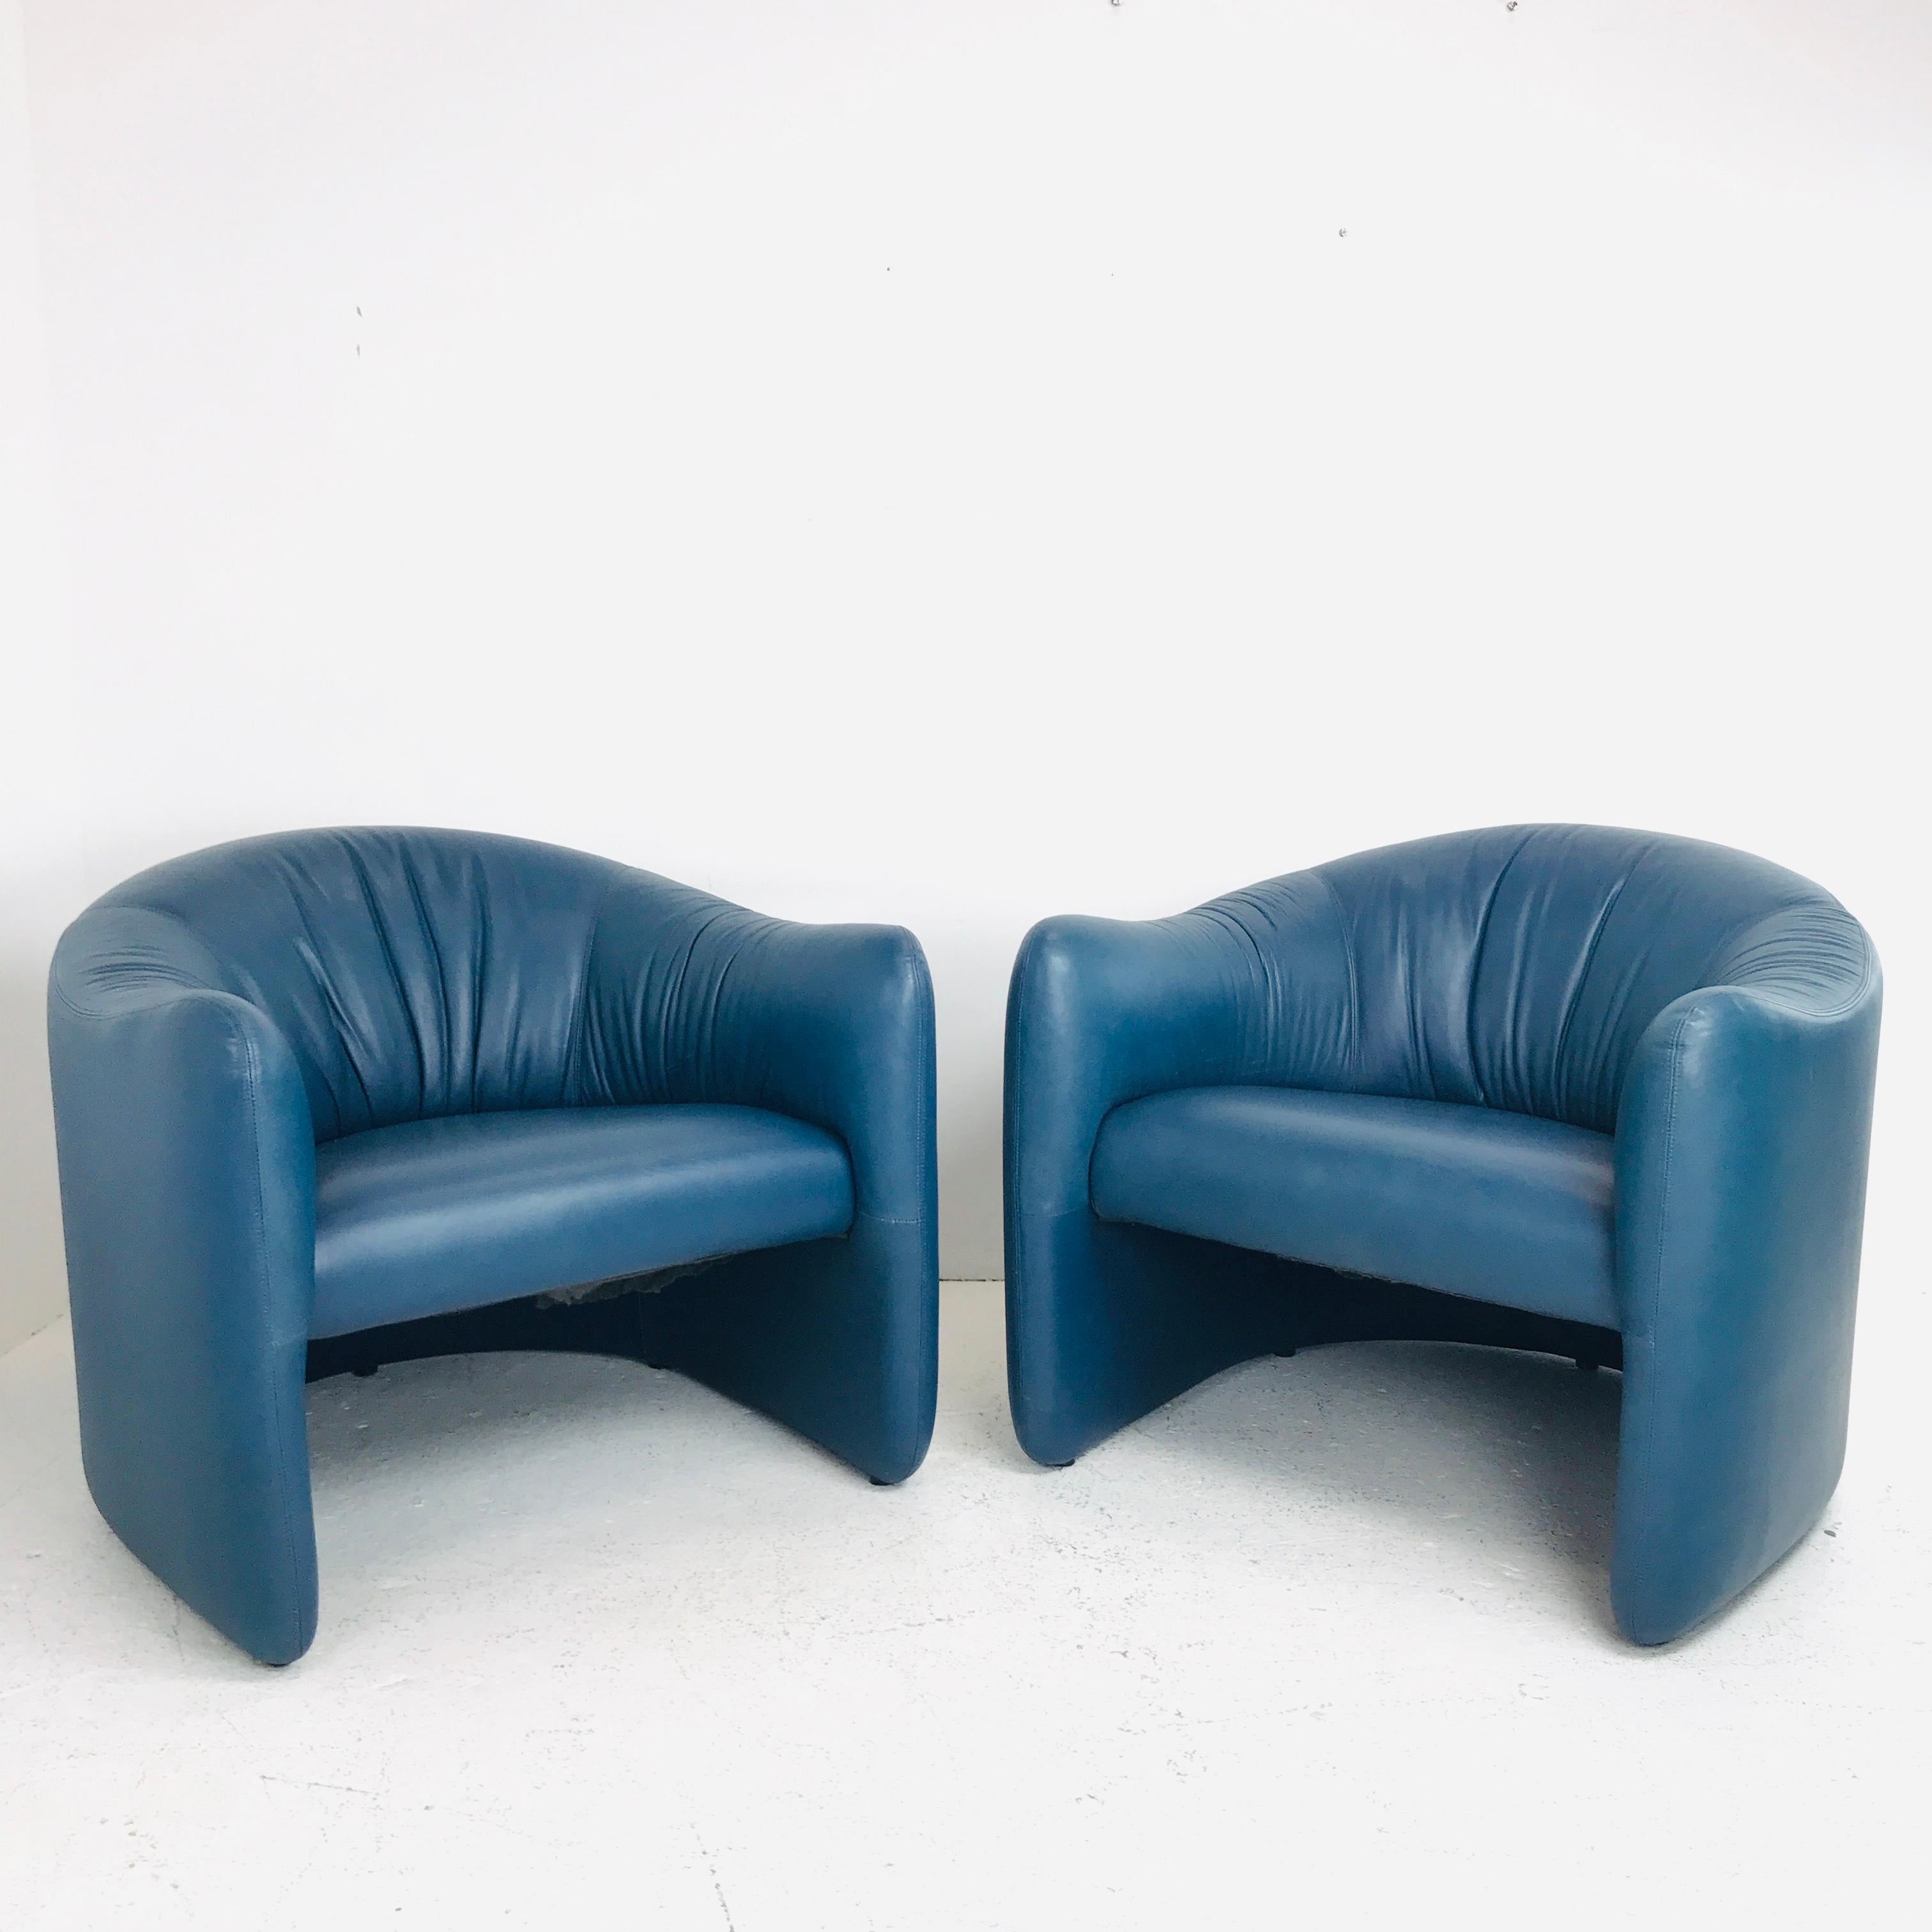 Pair of Blue Leather Metro Lounge Chairs 1